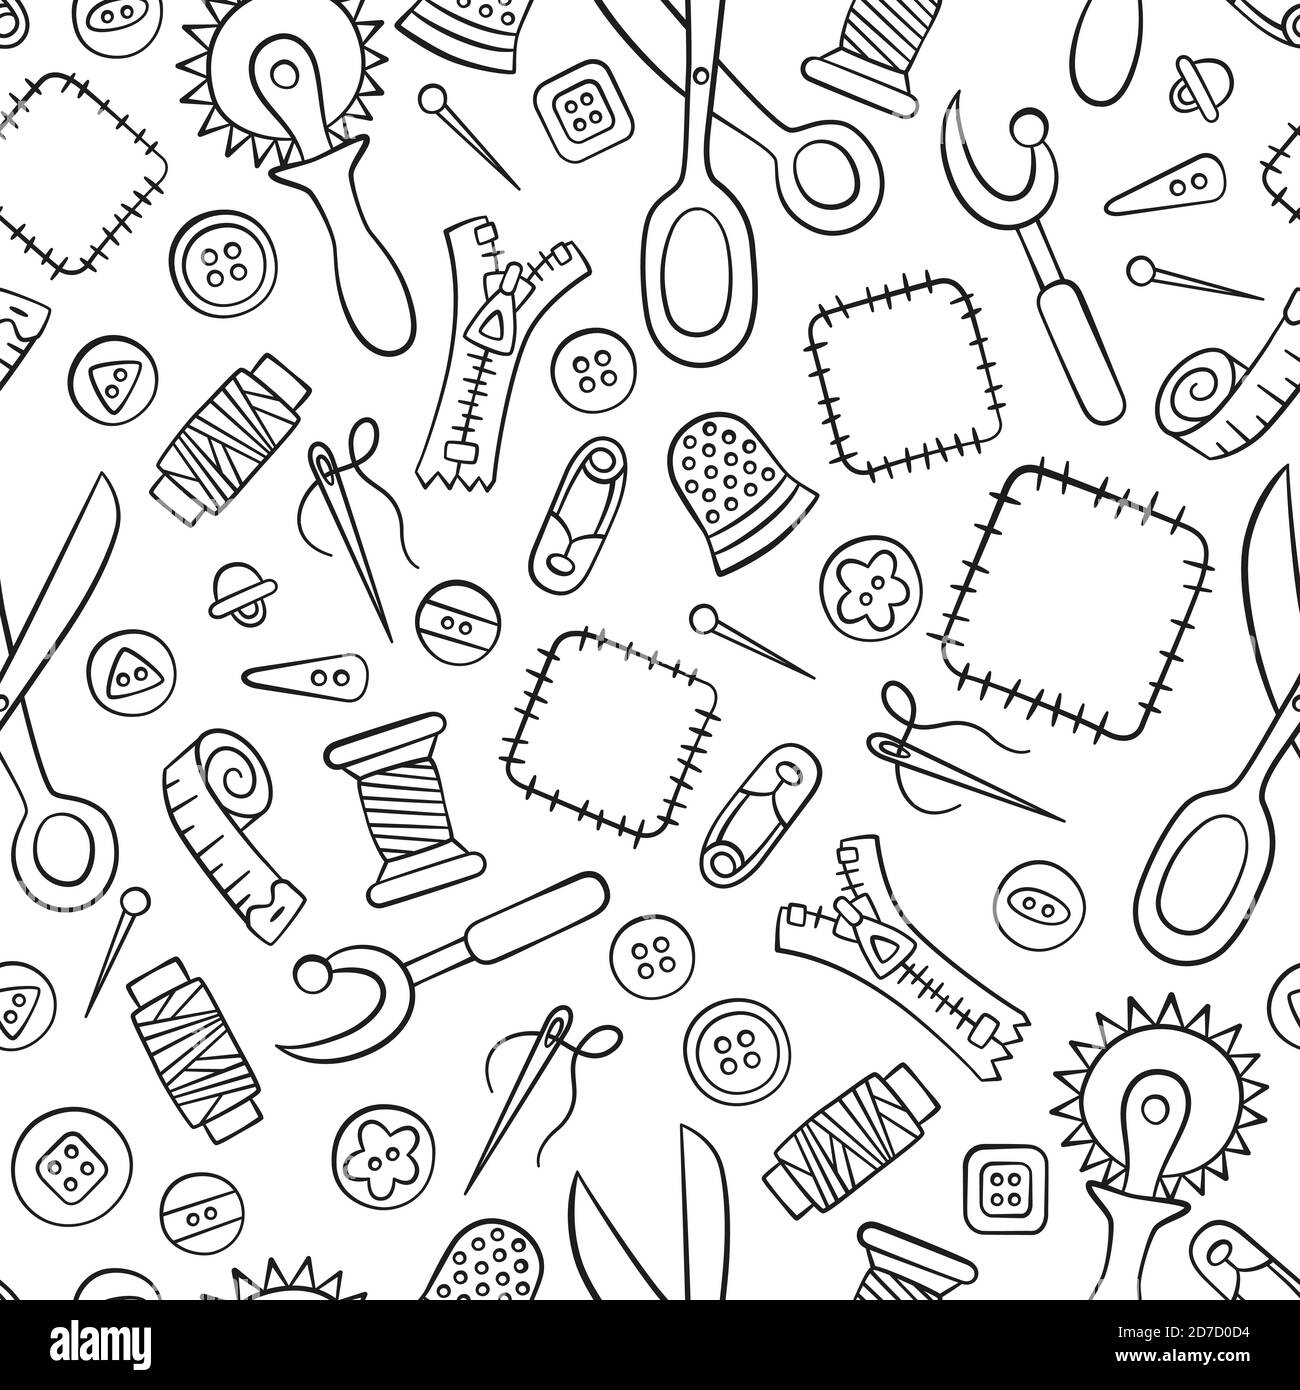 Tools and accessories for Sewing and needlework. Seamless pattern in doodle and cartoon style. Stock Vector